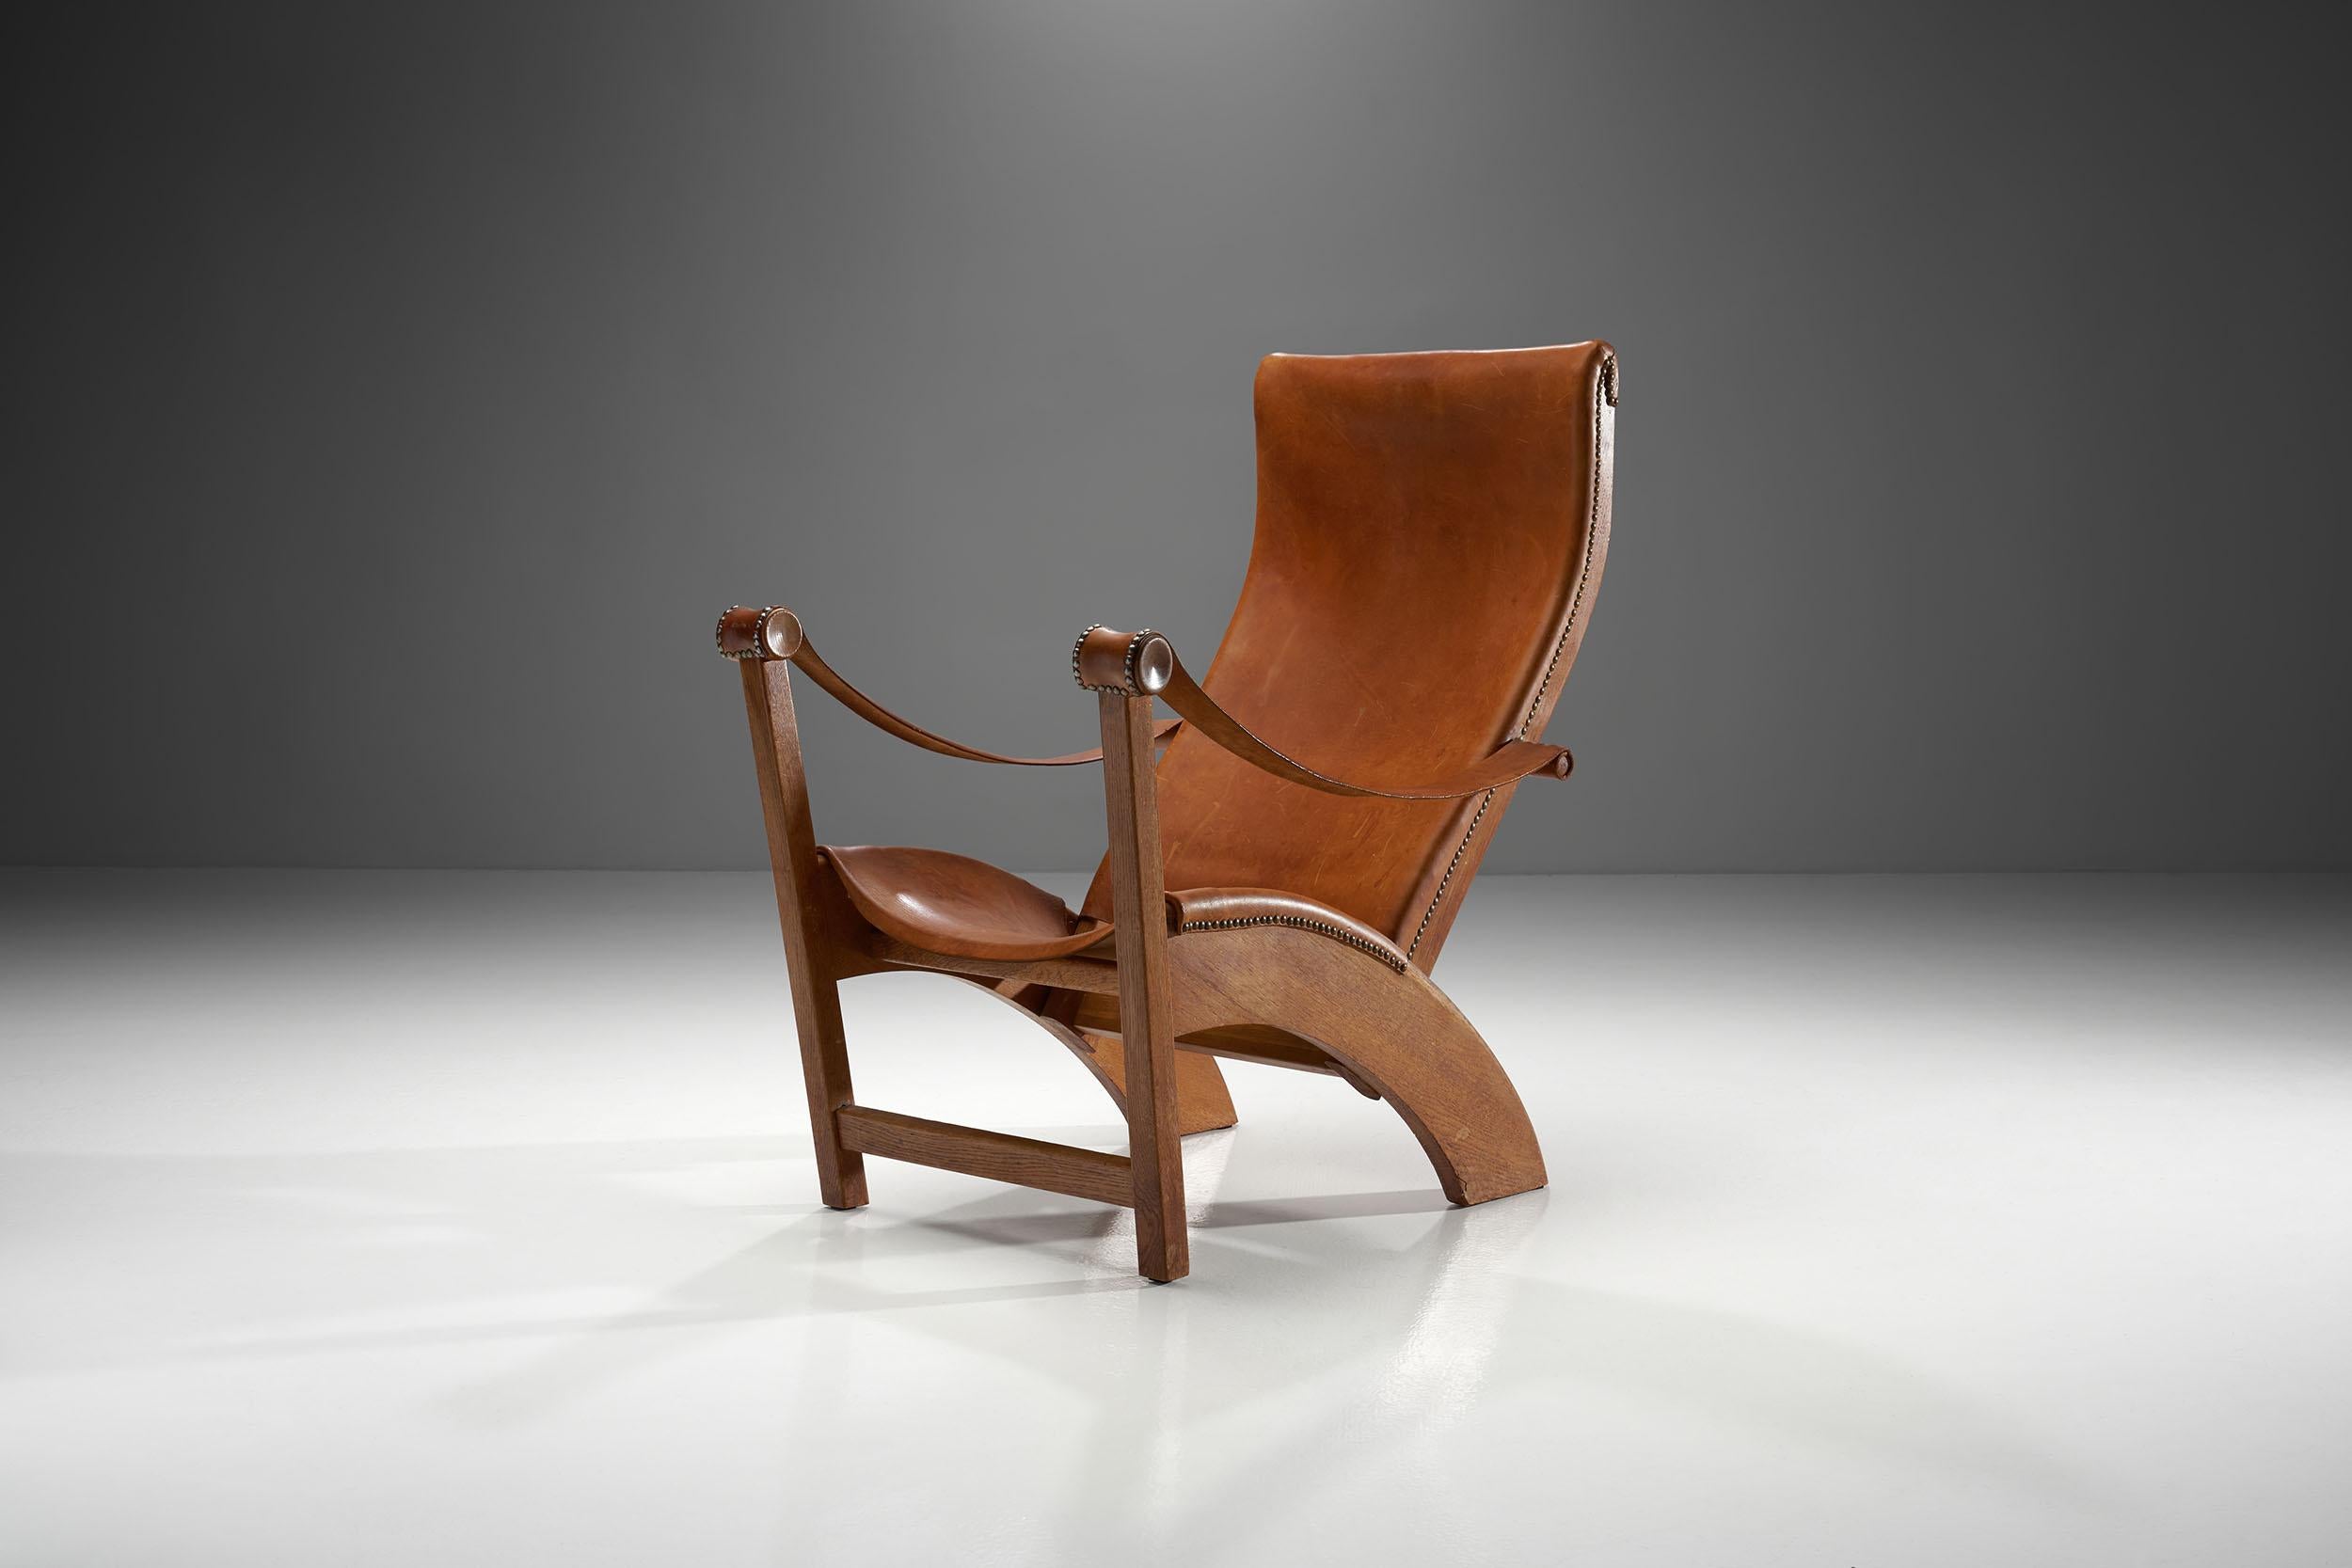 This “Københavnerstolen” (Copenhagen Chair) is Mogens Voltelen’s most famous design. This particular model is from an early edition, which can be observed in the armrests that are directly attached to the sides of the backrest.

The sweeping